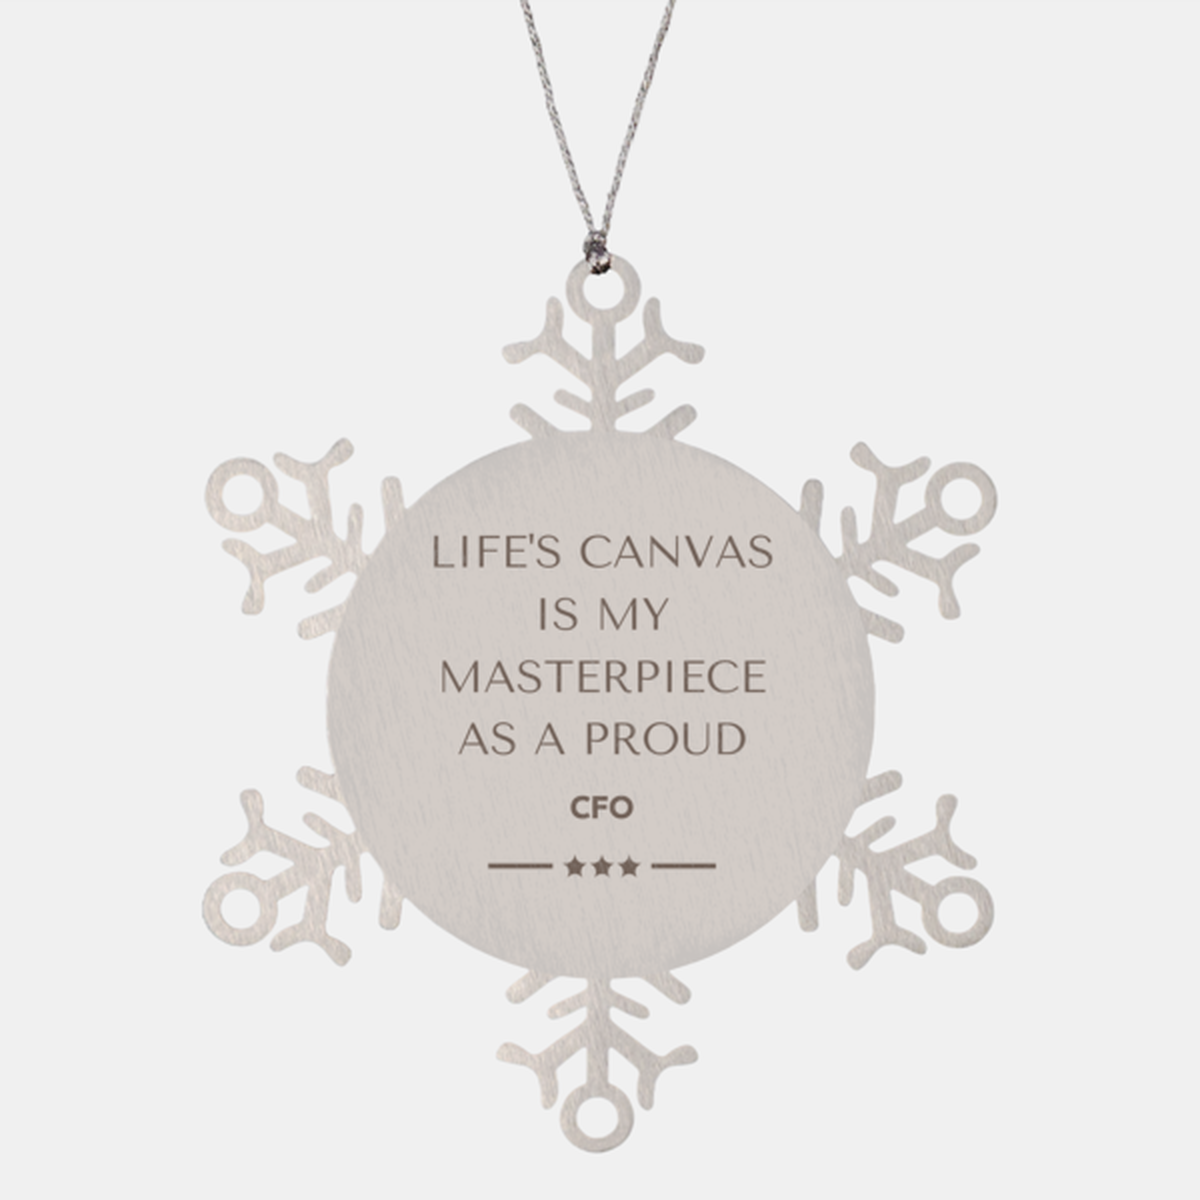 Proud CFO Gifts, Life's canvas is my masterpiece, Epic Birthday Christmas Unique Snowflake Ornament For CFO, Coworkers, Men, Women, Friends